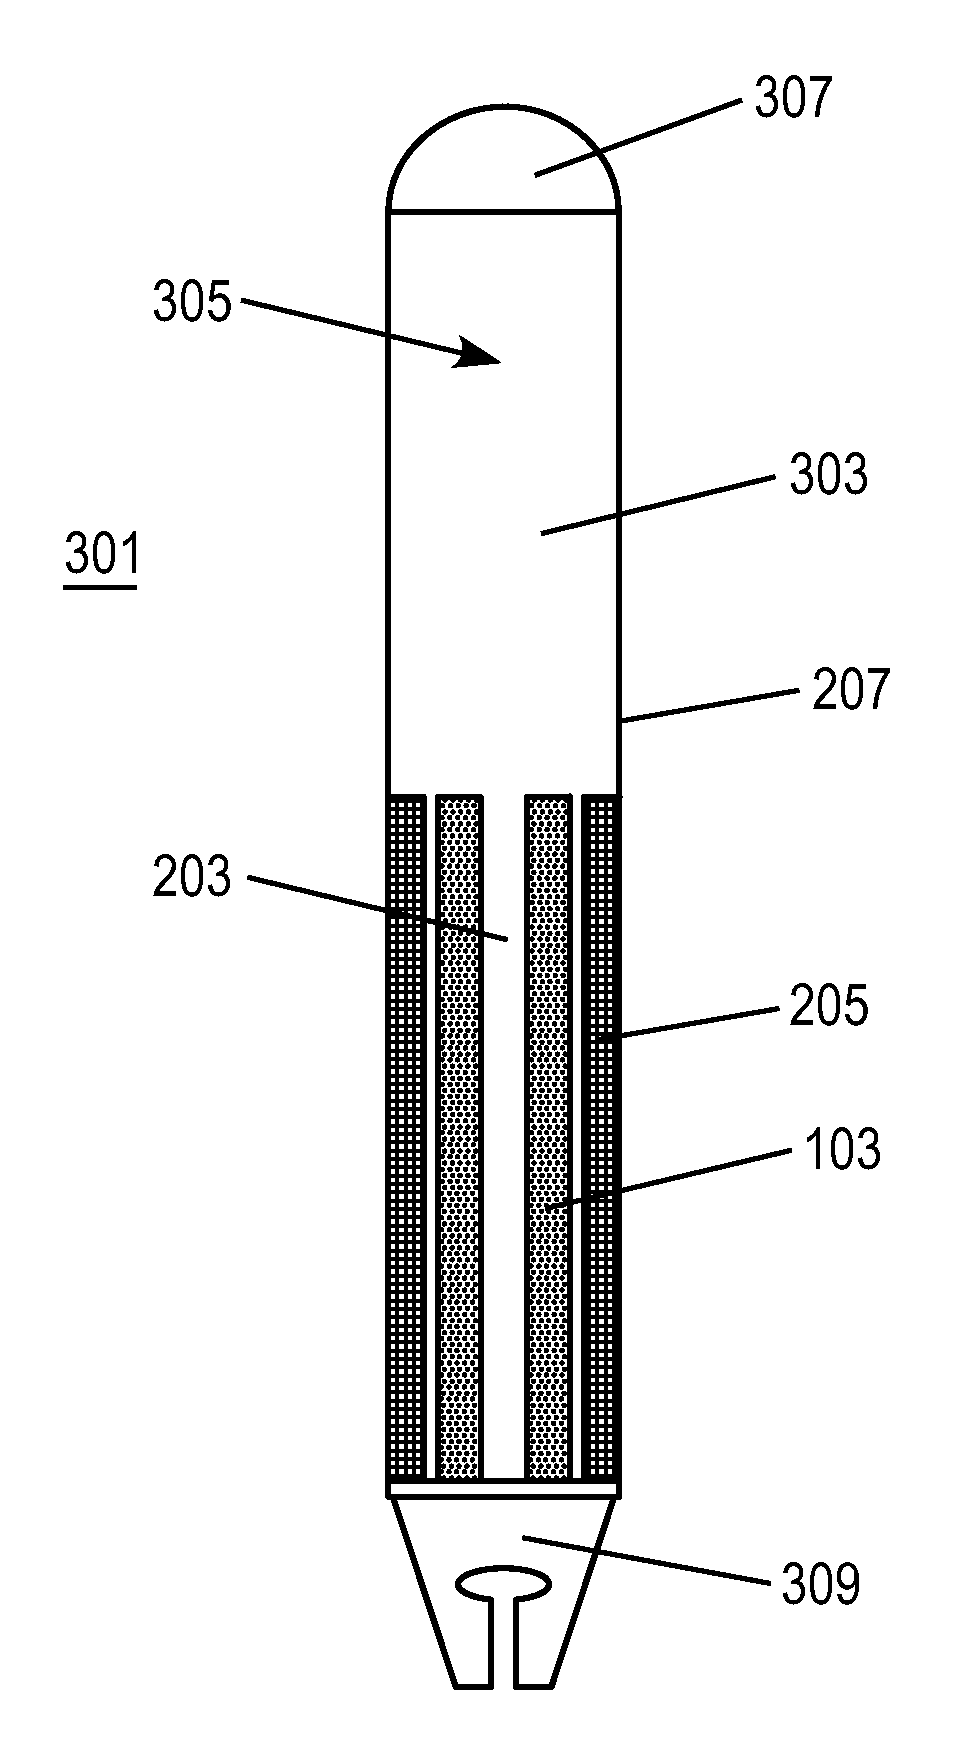 Sheathed, annular metal nuclear fuel